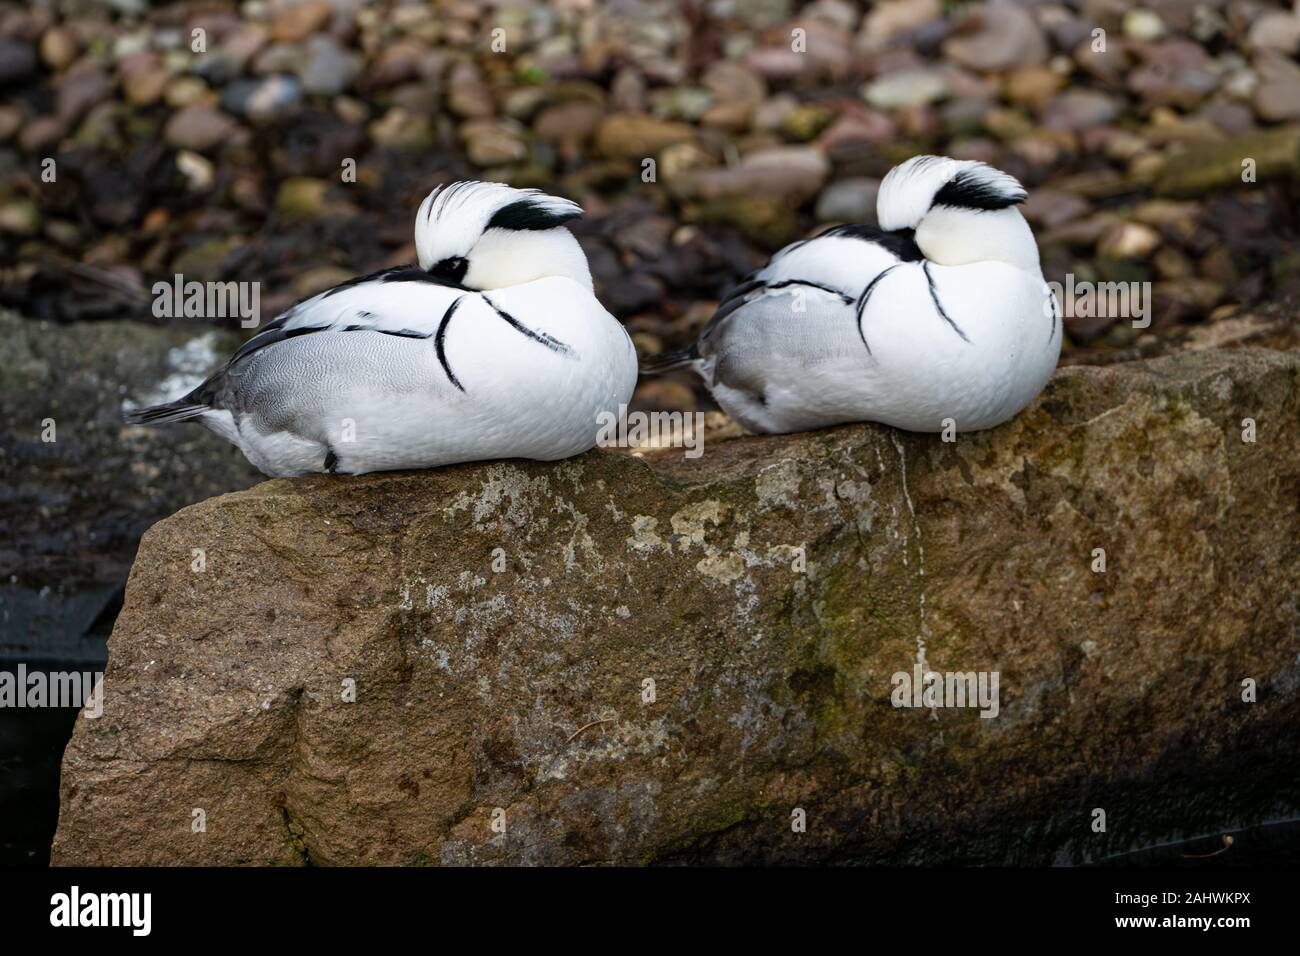 Two male Smew (Mergus albellus) black and white ducks, resting side-by-side on a rock with the same pose Stock Photo